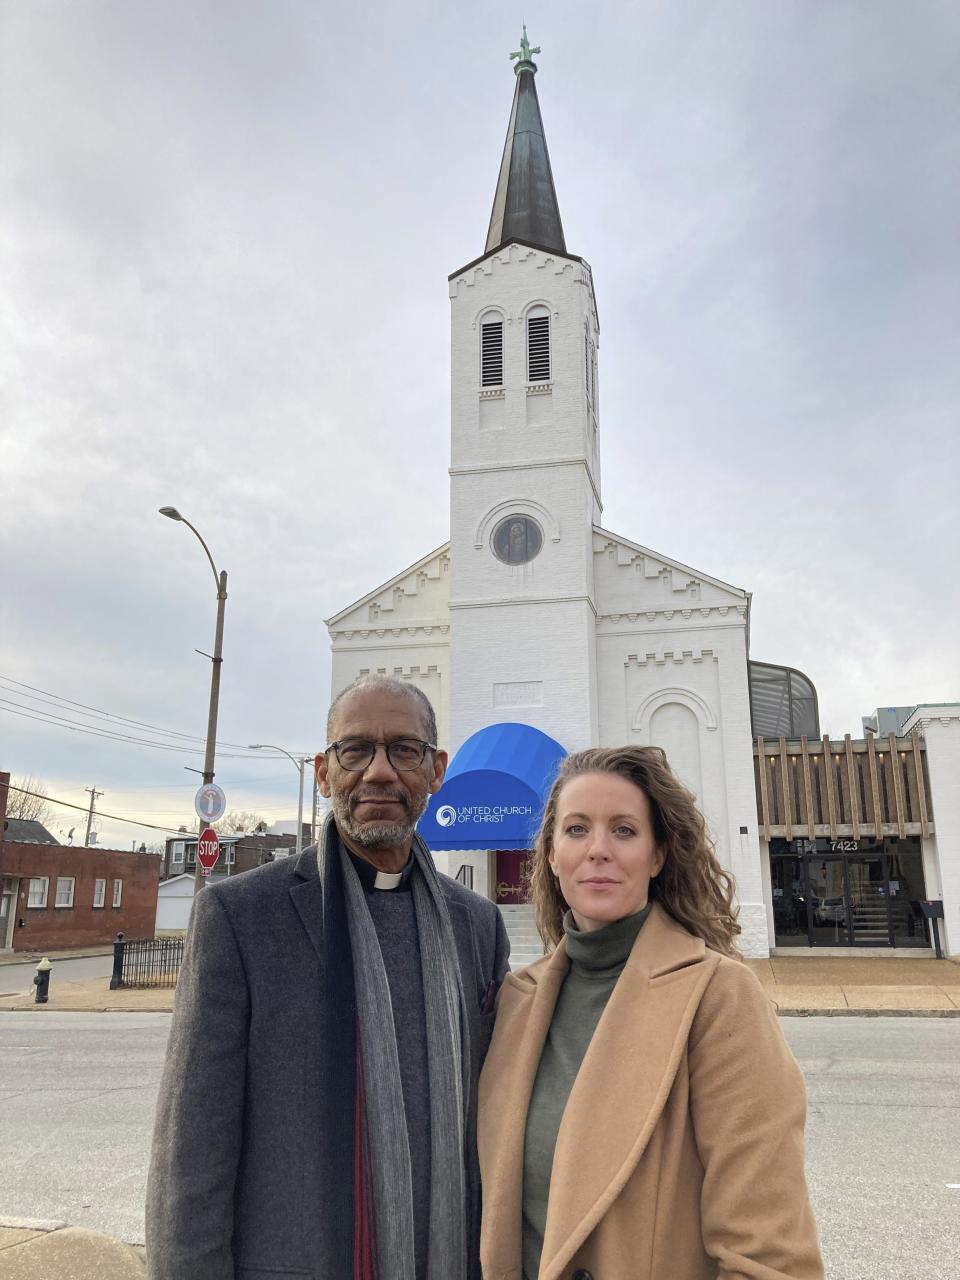 The Rev. Darryl Gray and the Rev. Lauren Bennett stand in front of Bennett's church, Metropolitan Community Church of Greater St. Louis, on Jan. 10, 2023, in St. Louis, Mo. Both served as spiritual advisers at recent executions in Missouri, sitting alongside the inmates and touching them as the process occurred. Spiritual advisers have been increasingly present during executions since a Supreme Court ruling last year. (AP Photo/Jim Salter)